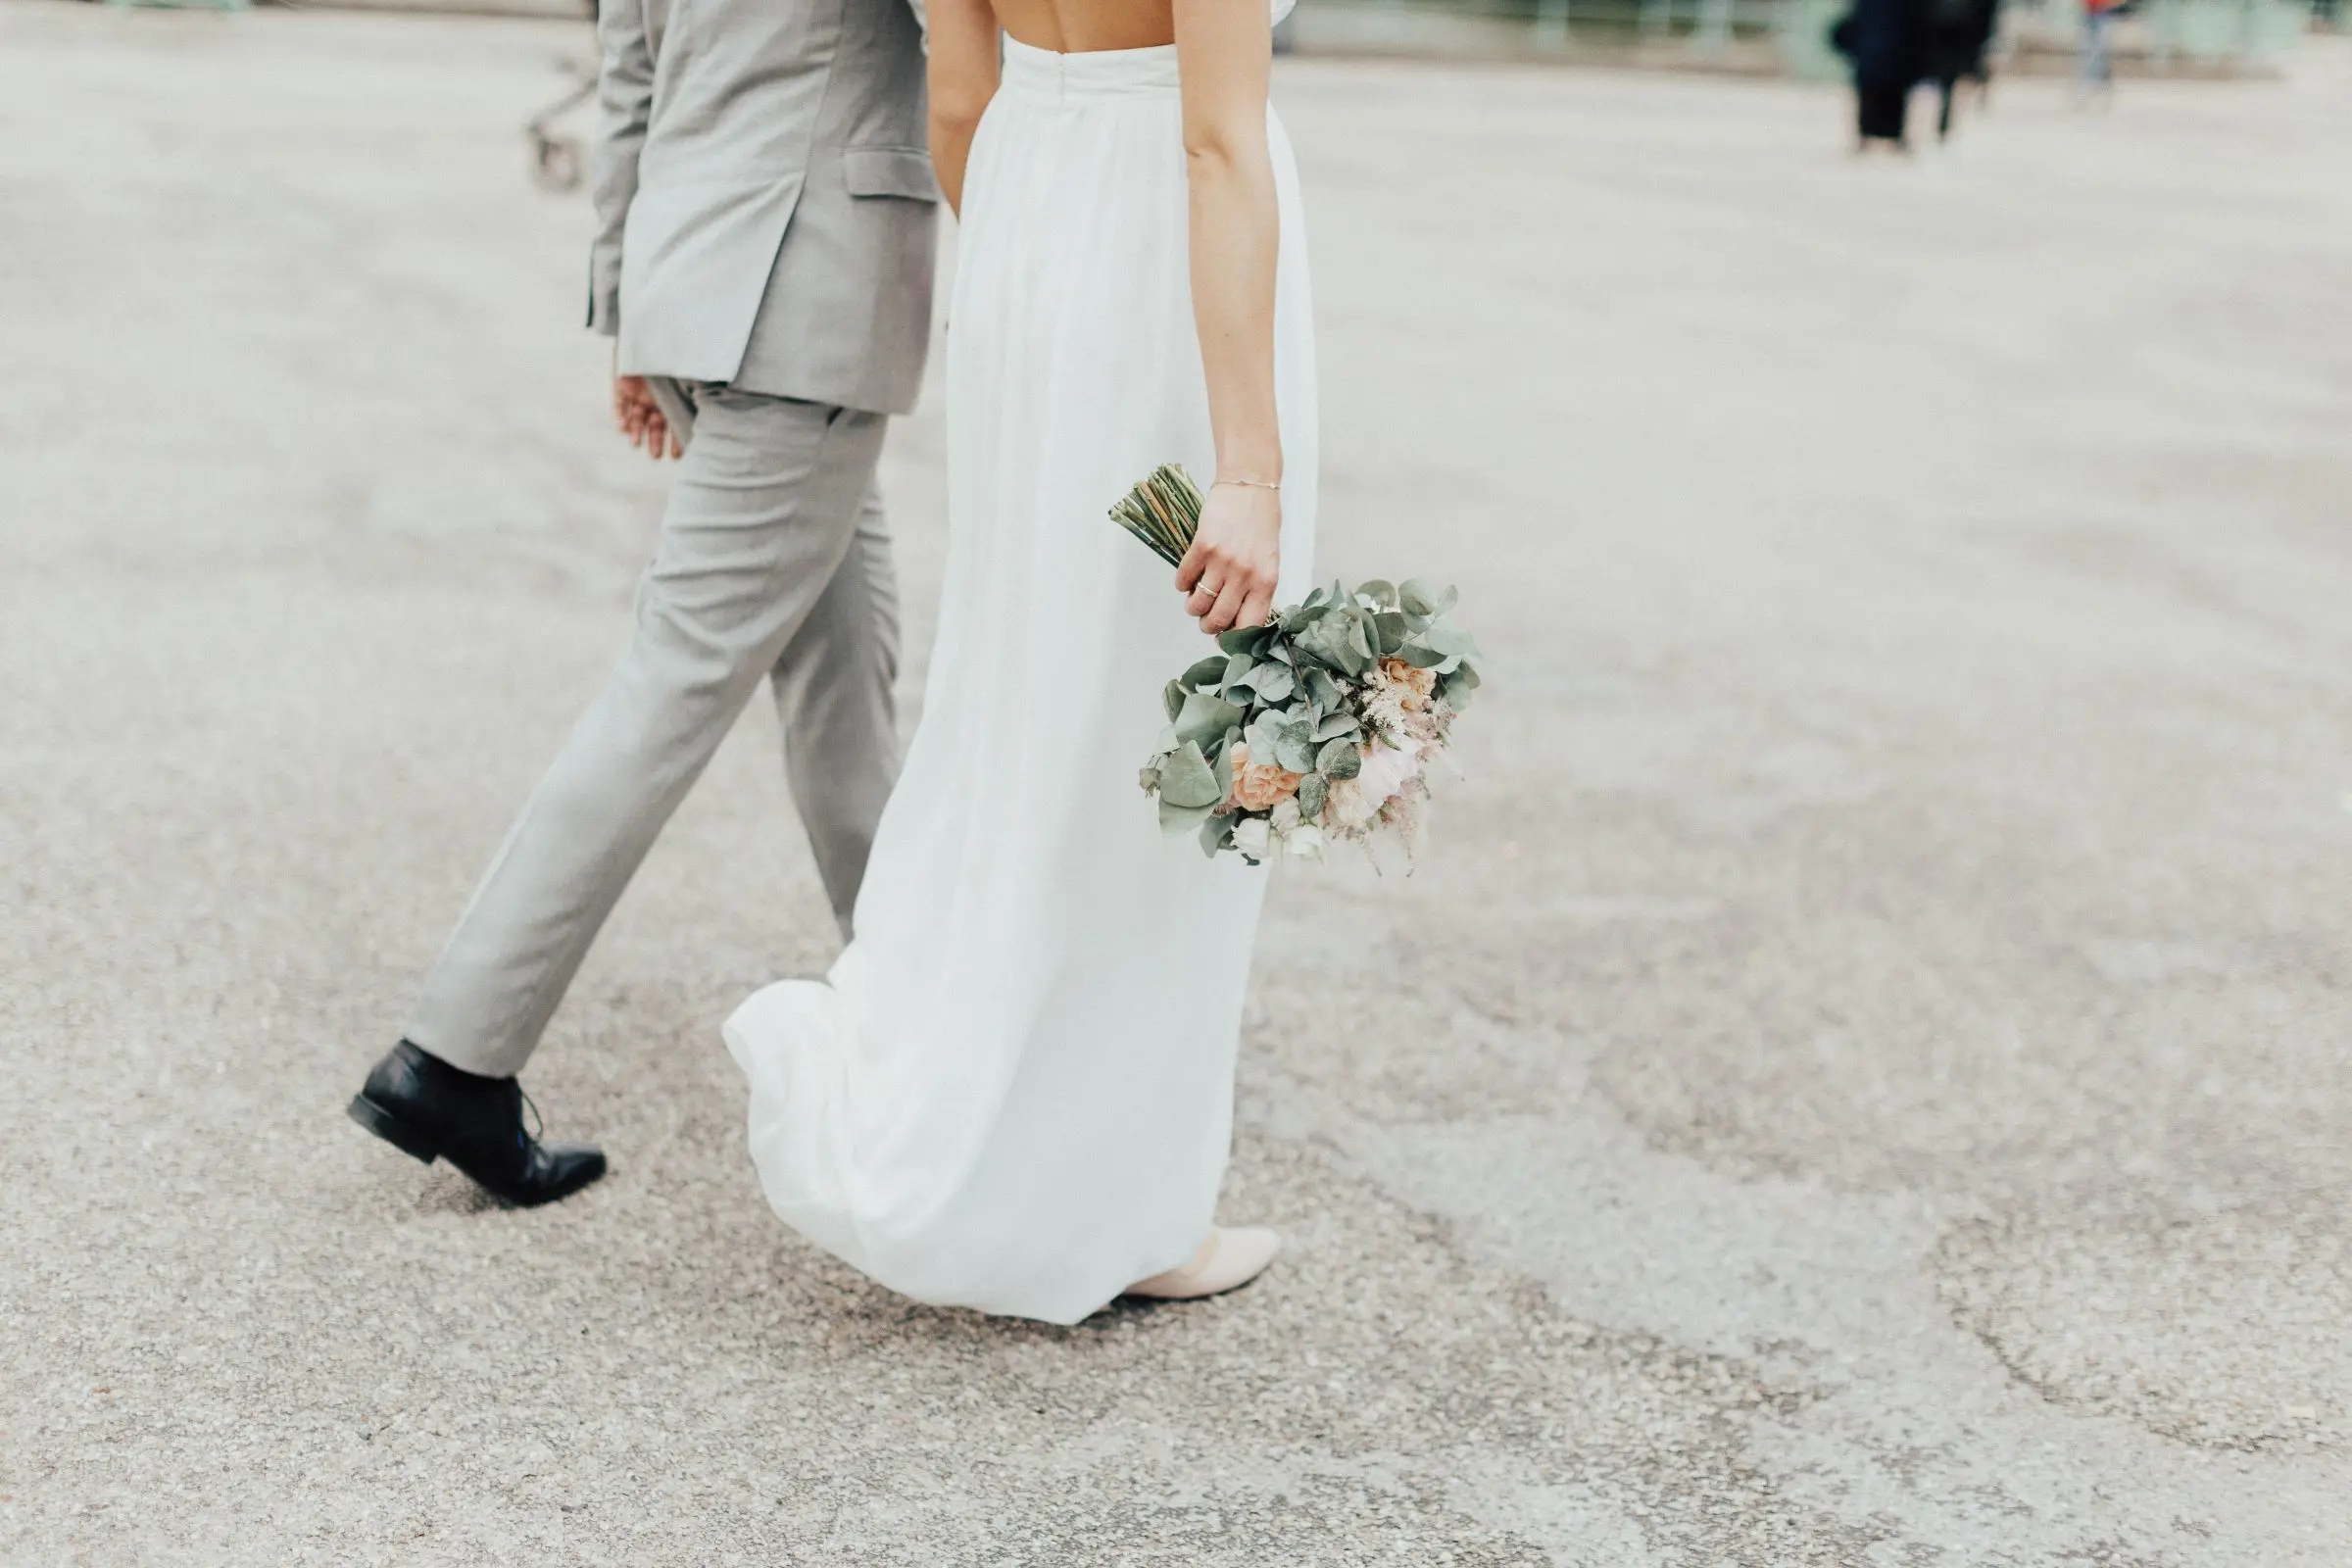 wedding couple walking along hands in hands, photo by Katharina Wergen.